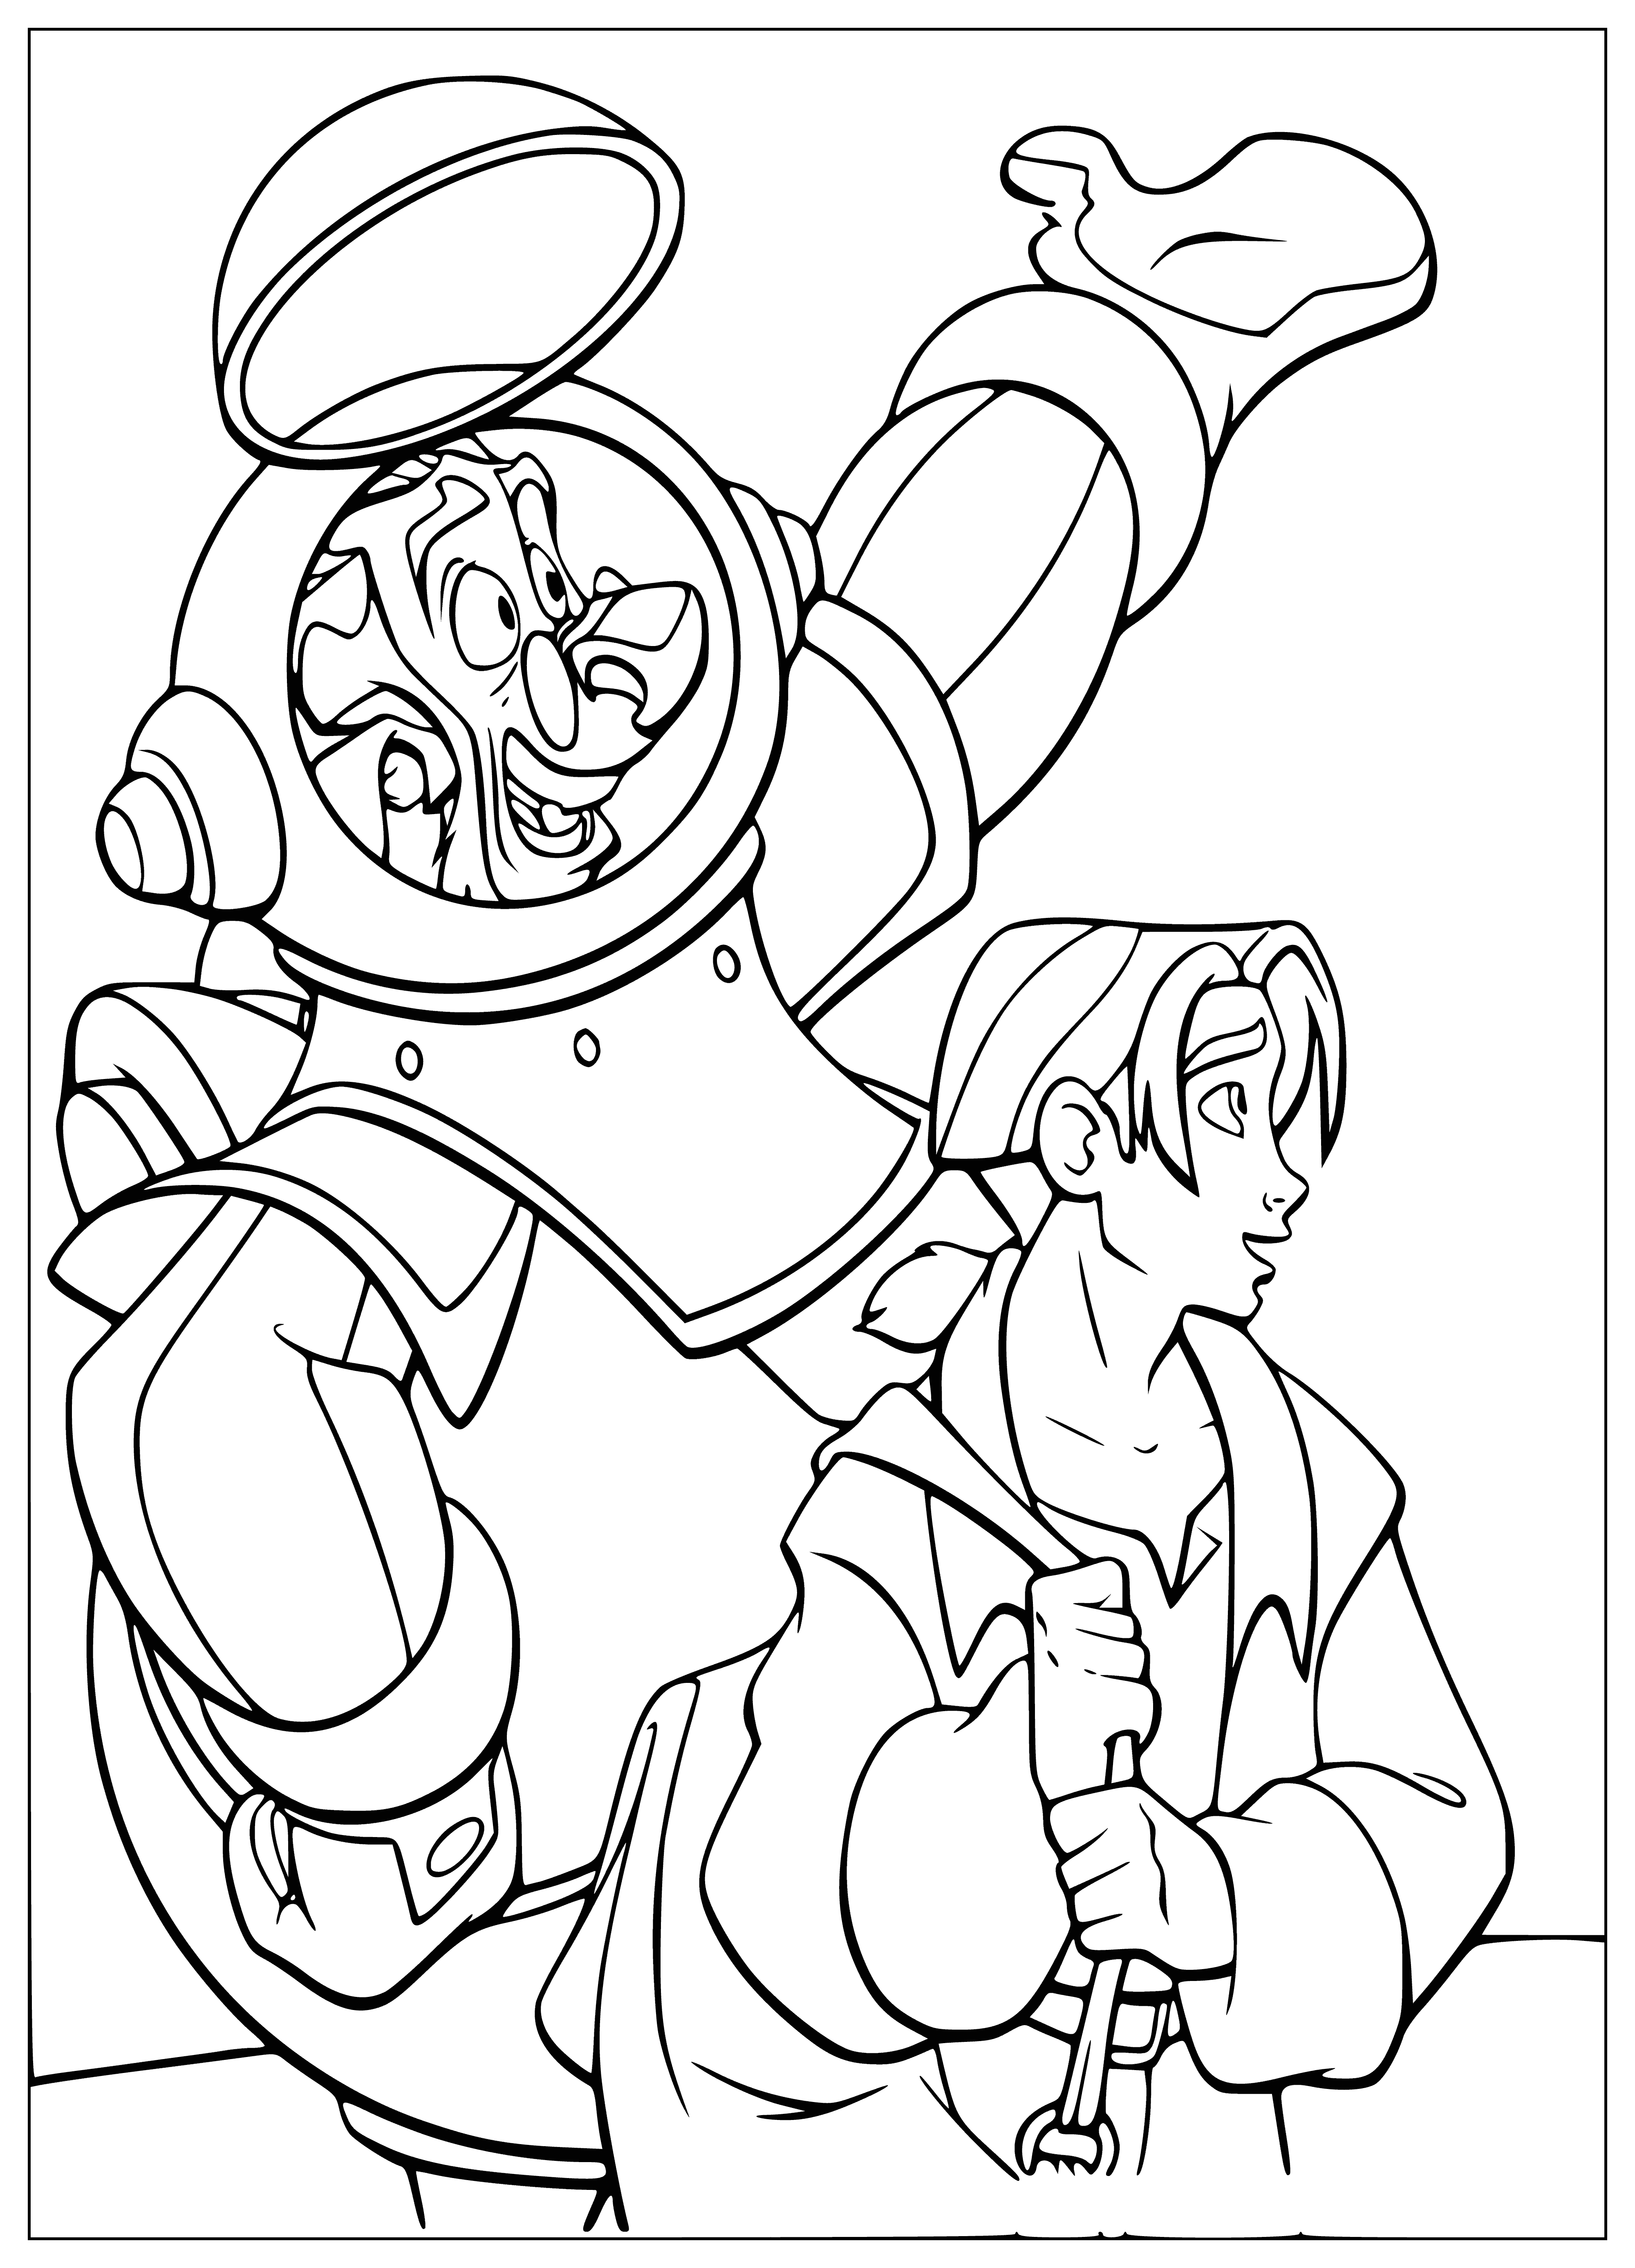 Livsy and Hawkins coloring page